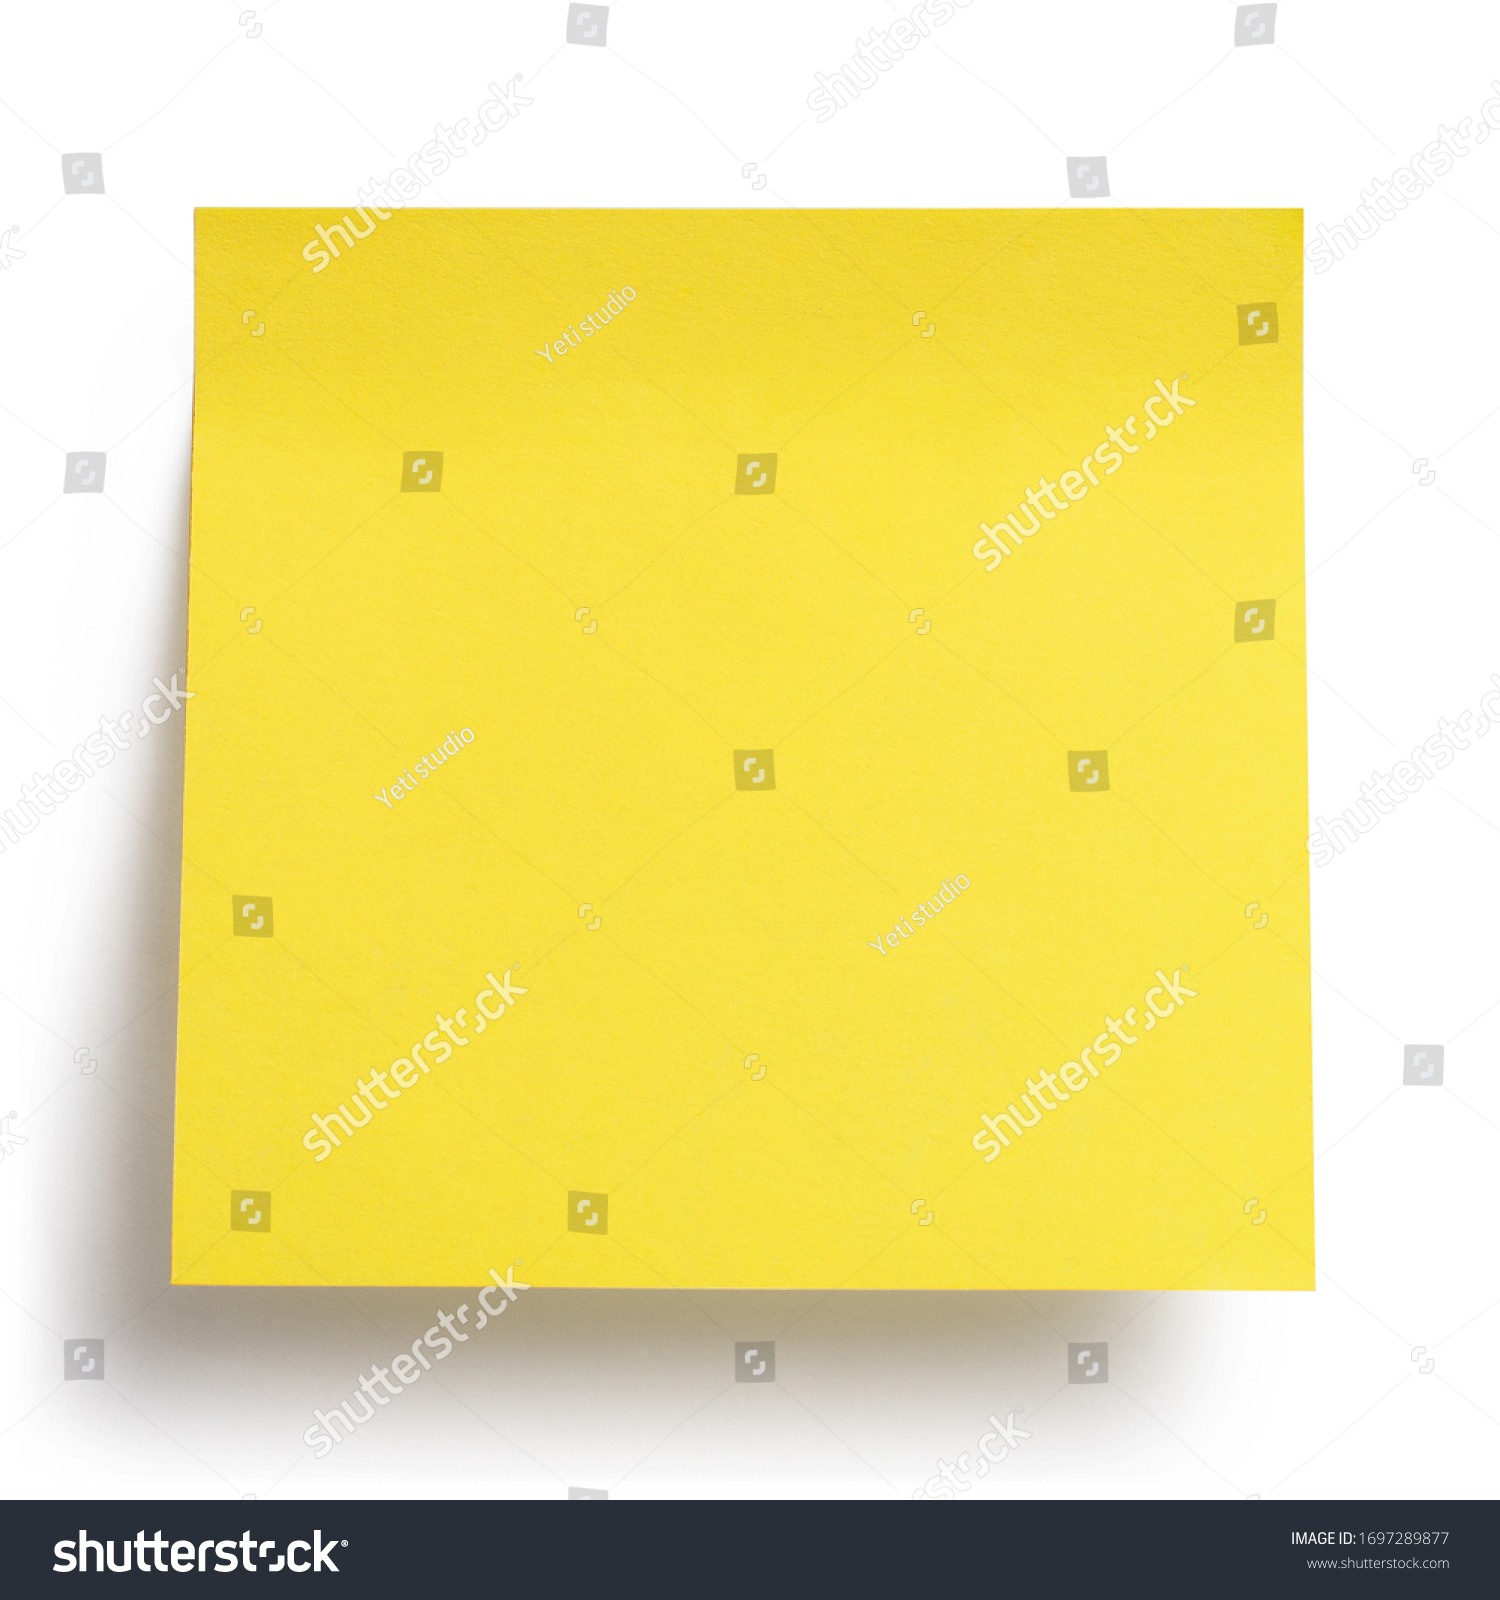 Close-up of a yellow blank sticker, isolated on white background #1697289877